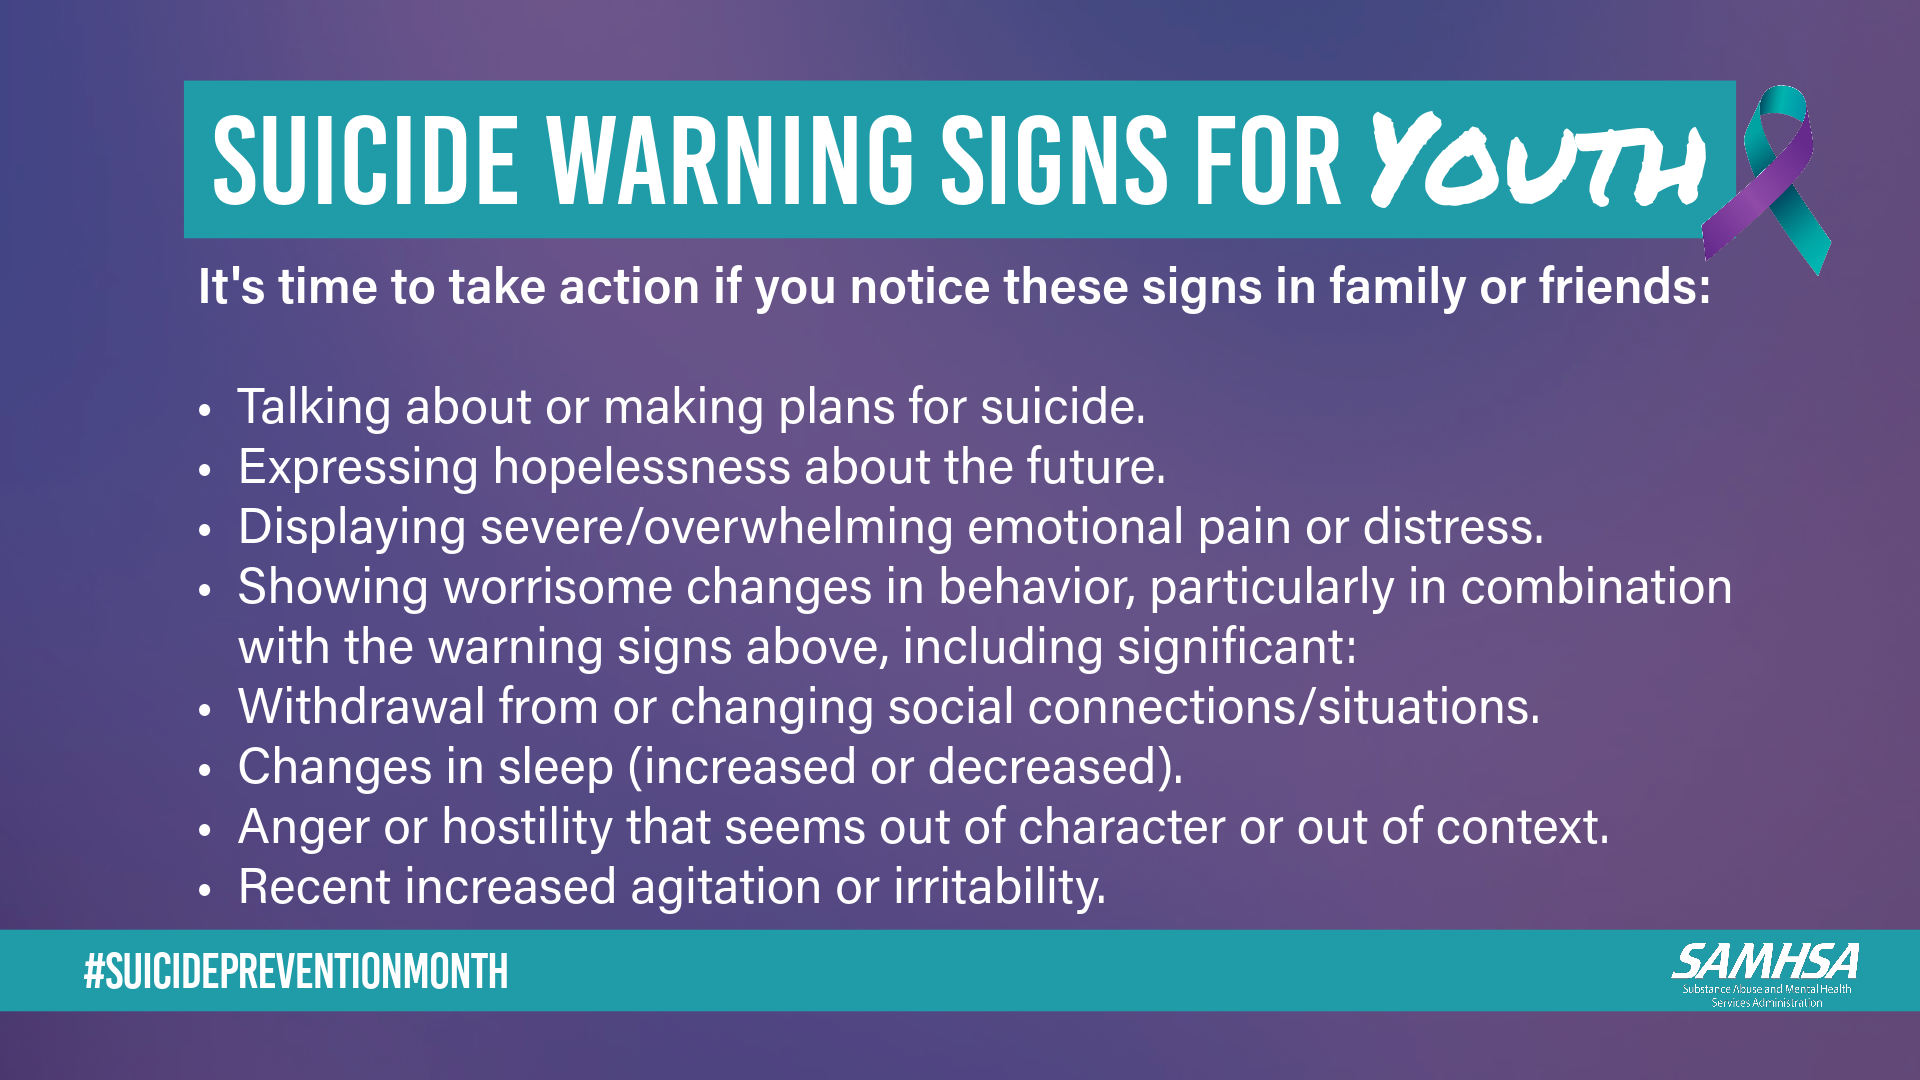 Suicide Warning Signs for Youth It's time to take action if you notice these signs in family or friends: 1 Talking about or making plans for suicide 2Expressing hopelessness about the future 3 Displaying severe/overwhelming emotional pain or distress. 4 Showing worrisome changes in behavior, particularly in combination with the warning signs above, including significant; 5 Withdrawal from  or changing social connections/situations. 6 Changes in sleep (increased or decreased). 7 Anger or hostility that seems out of character or out of context. 8 Recent increased agitation or irritability. 